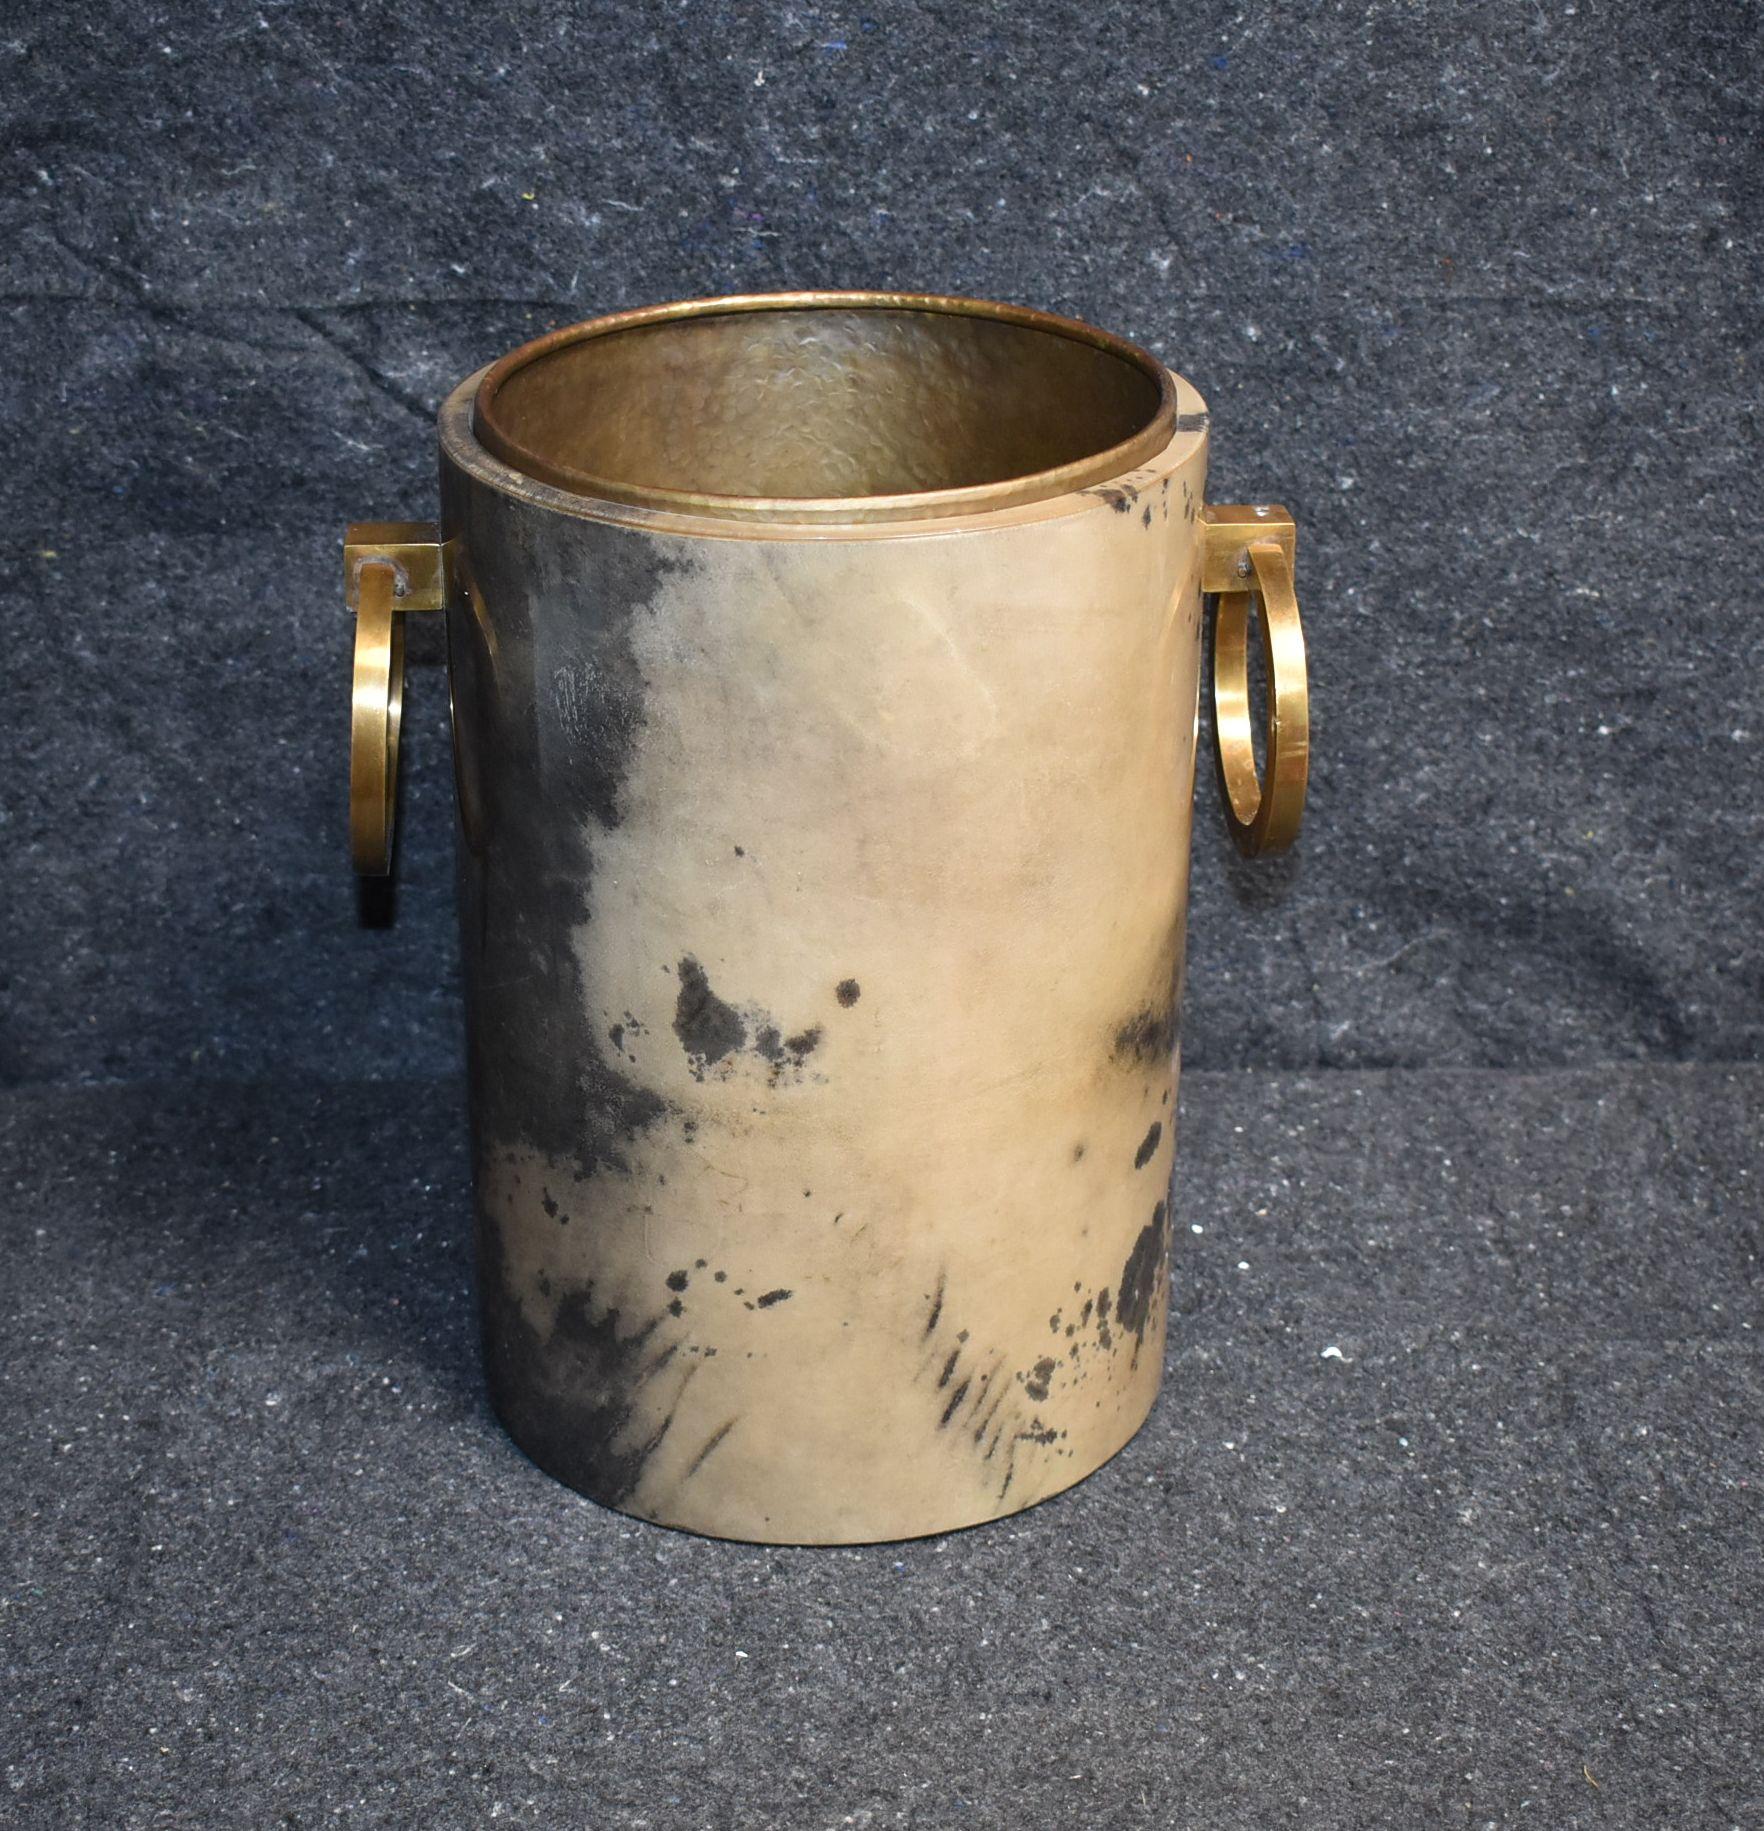 Trash can (also can be use as Champagne bucket) cover with goatskin and brass handles.
Inside bucket is made of copper finish.
Parchment is in varying shades of very light and dark gray. (High gloss polyester resin filled finish).

Additional